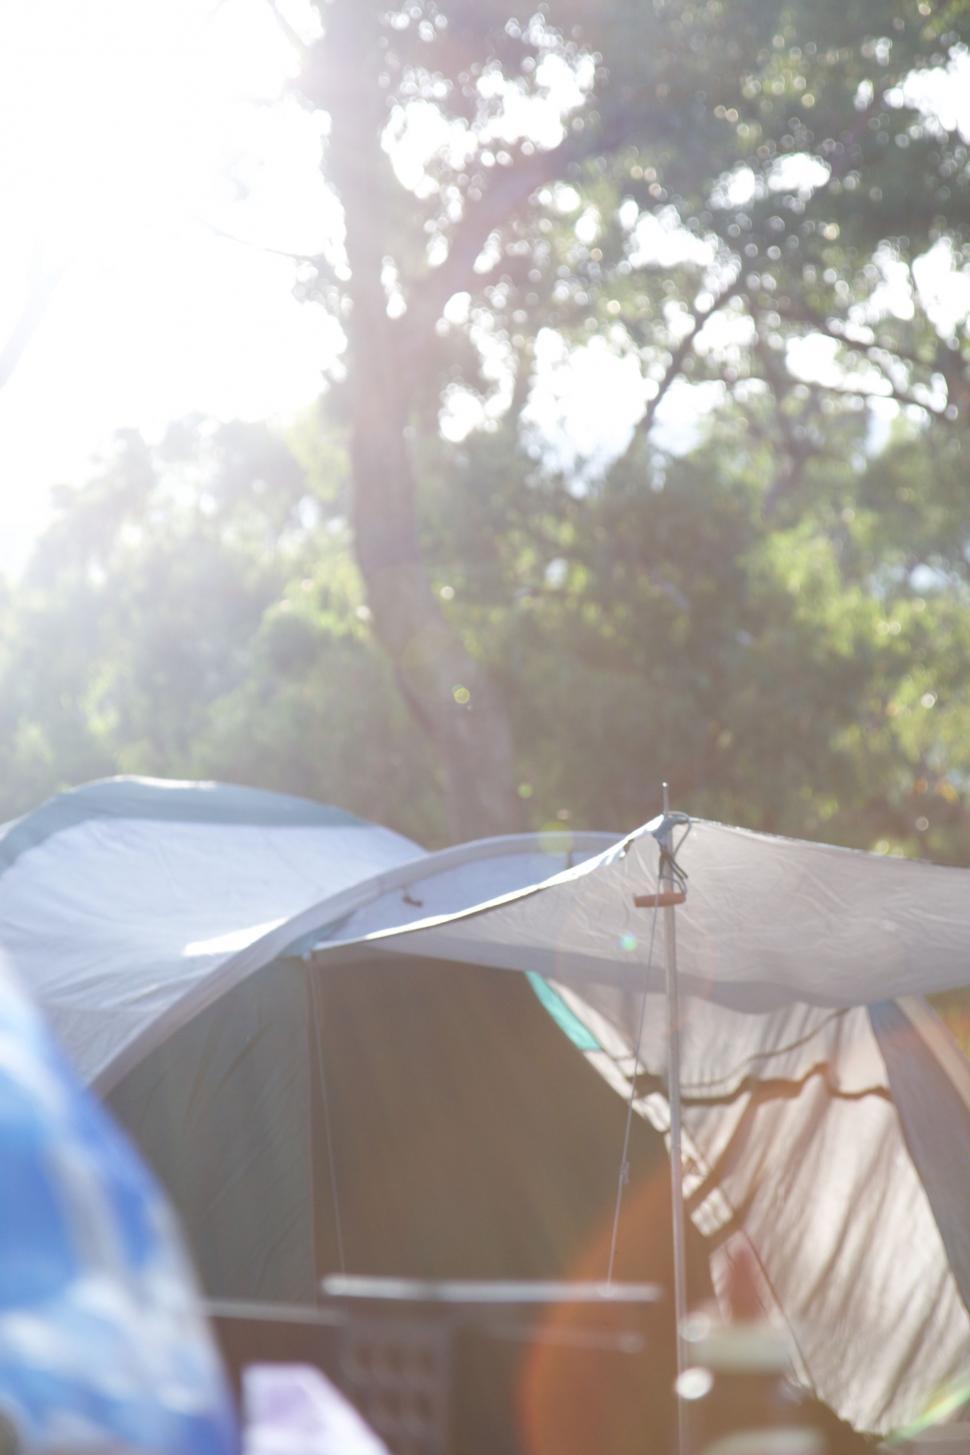 Free Image of Two Tents Situated Next to Each Other in a Campsite 